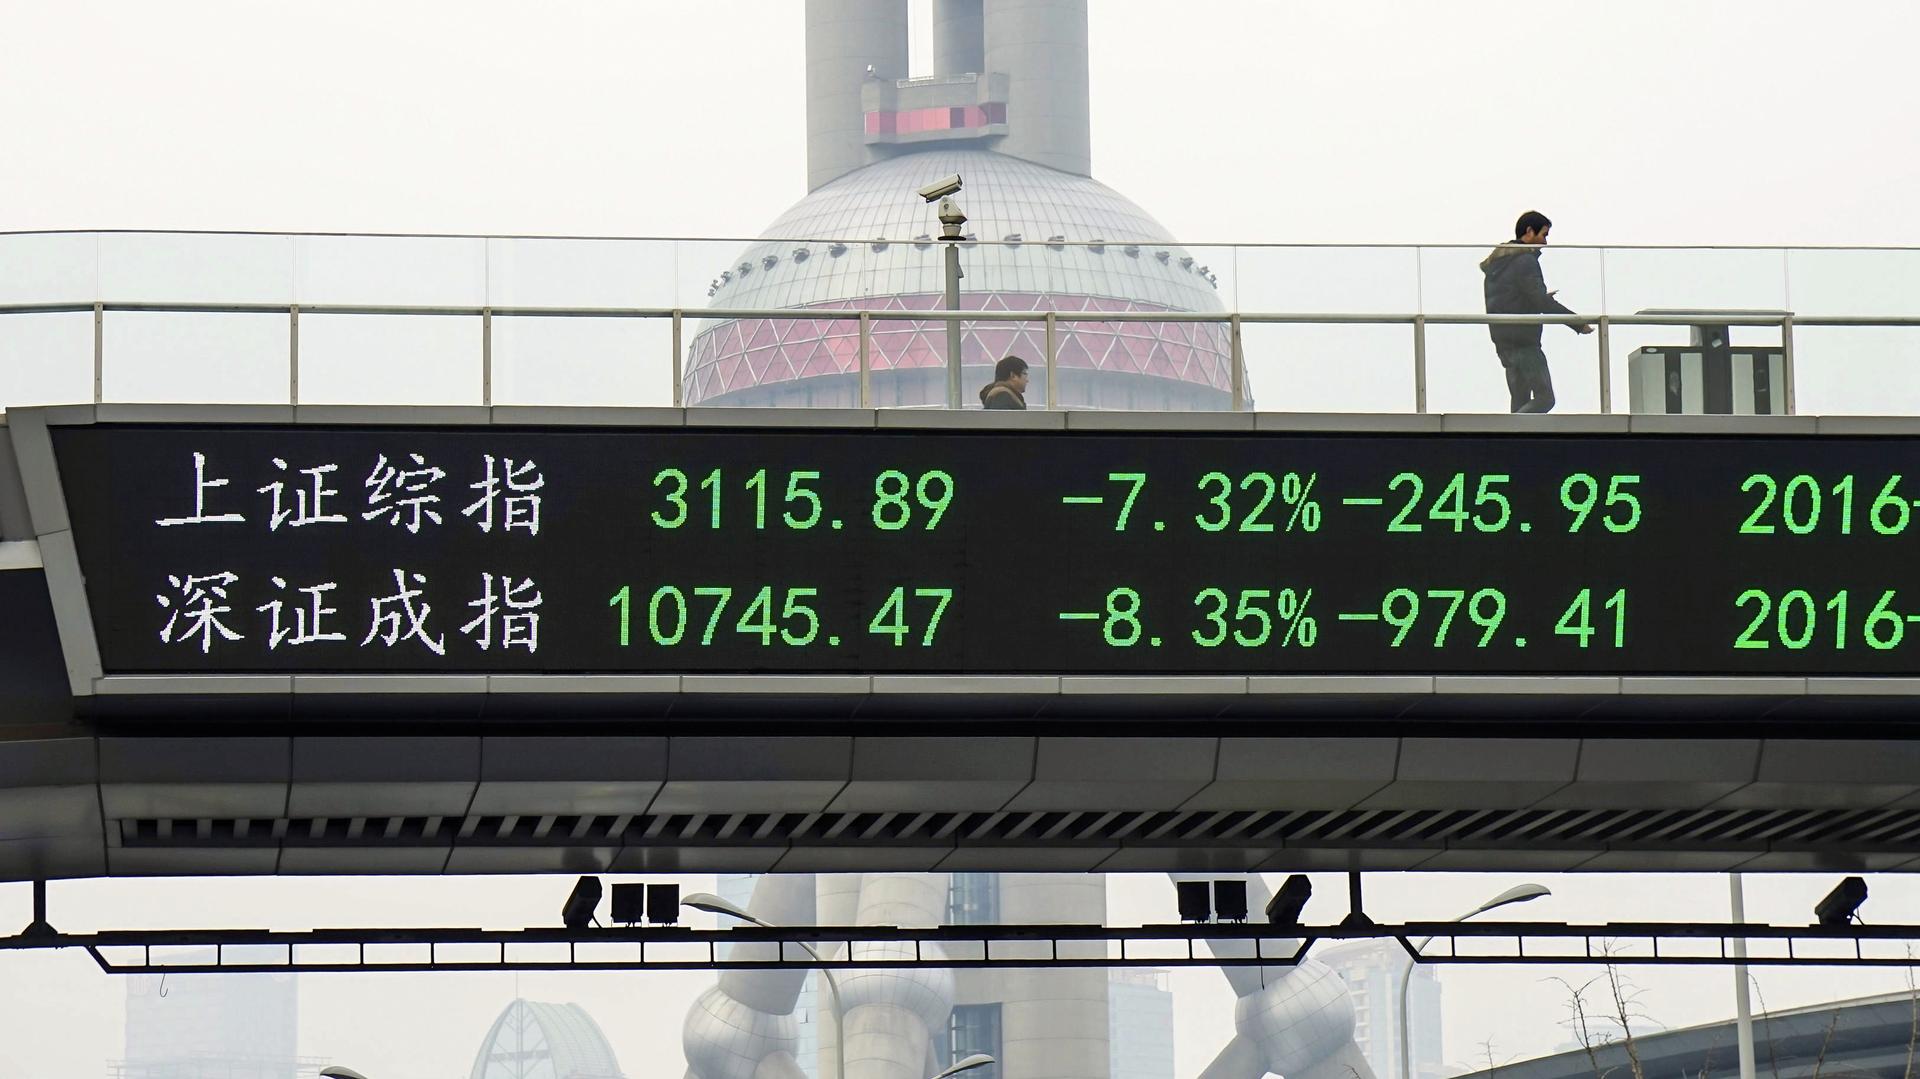 A man stands next to an electronic board in Shanghai showing the benchmark stock indices for Shanghai and Shenzhen, after the new circuit breaker mechanism suspended Thursday’s stock trading on the market in Shanghai, China, on January 7, 2016.